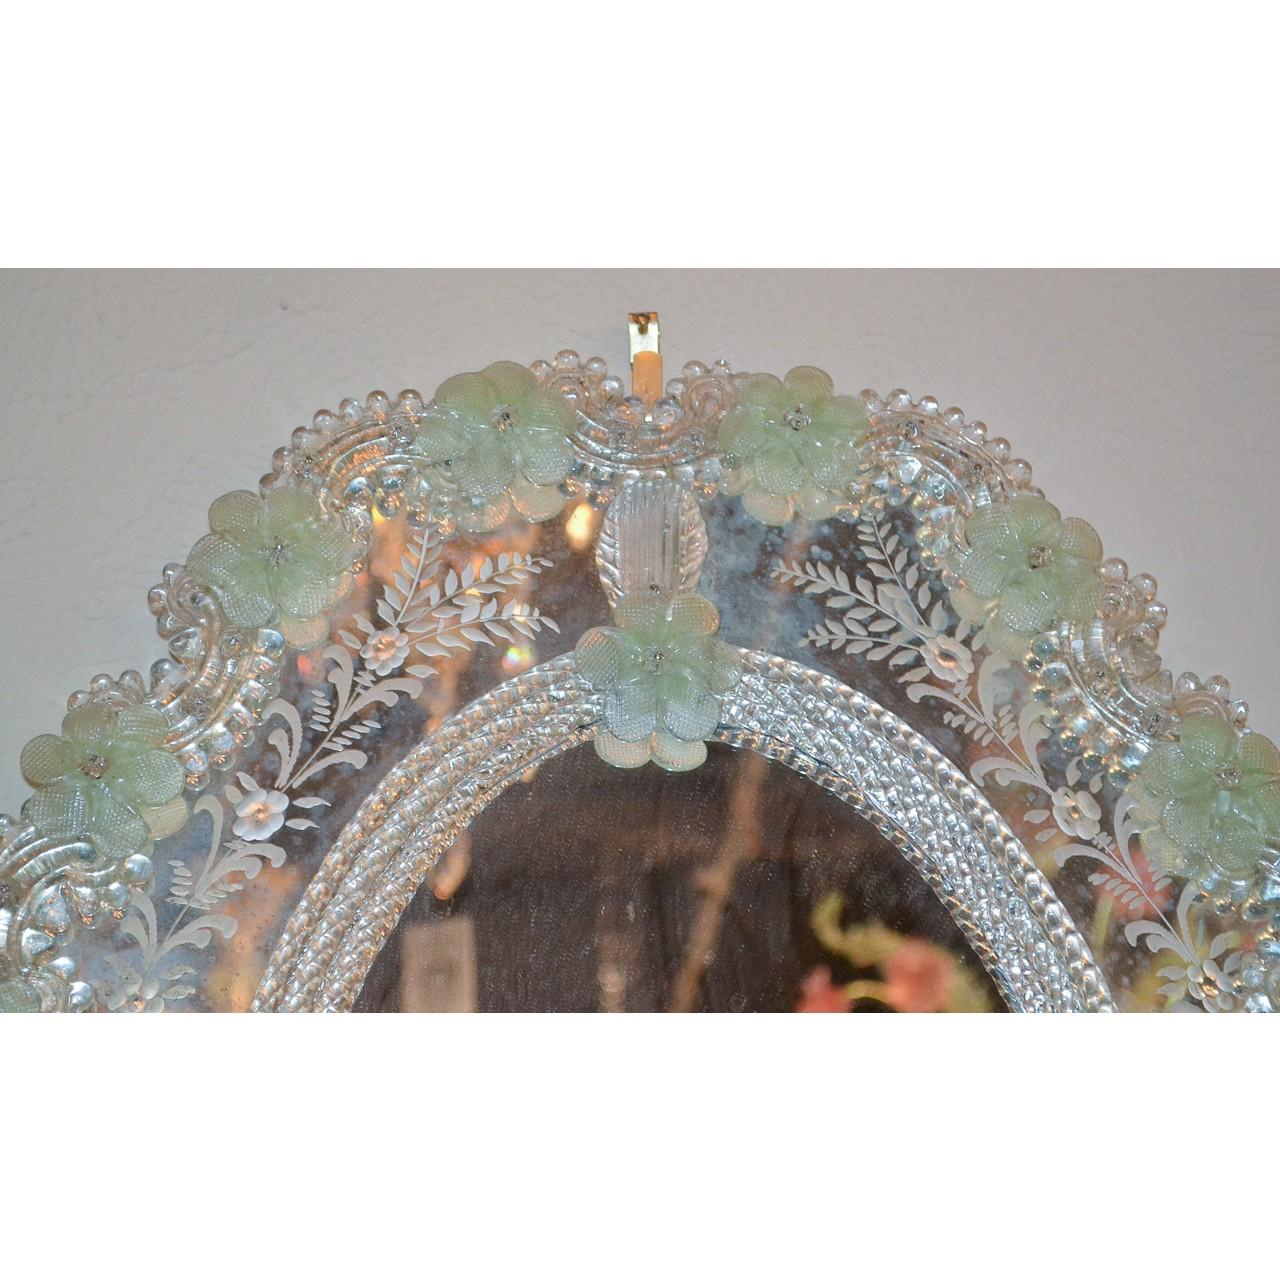 Beautifully elegant antique Italian Venetian glass oval mirror. The shaped beaded border accented with leaf scrolls and greenish hue rosettes outside an etched glass band featuring leaf sprays and flower heads,

circa 1900.